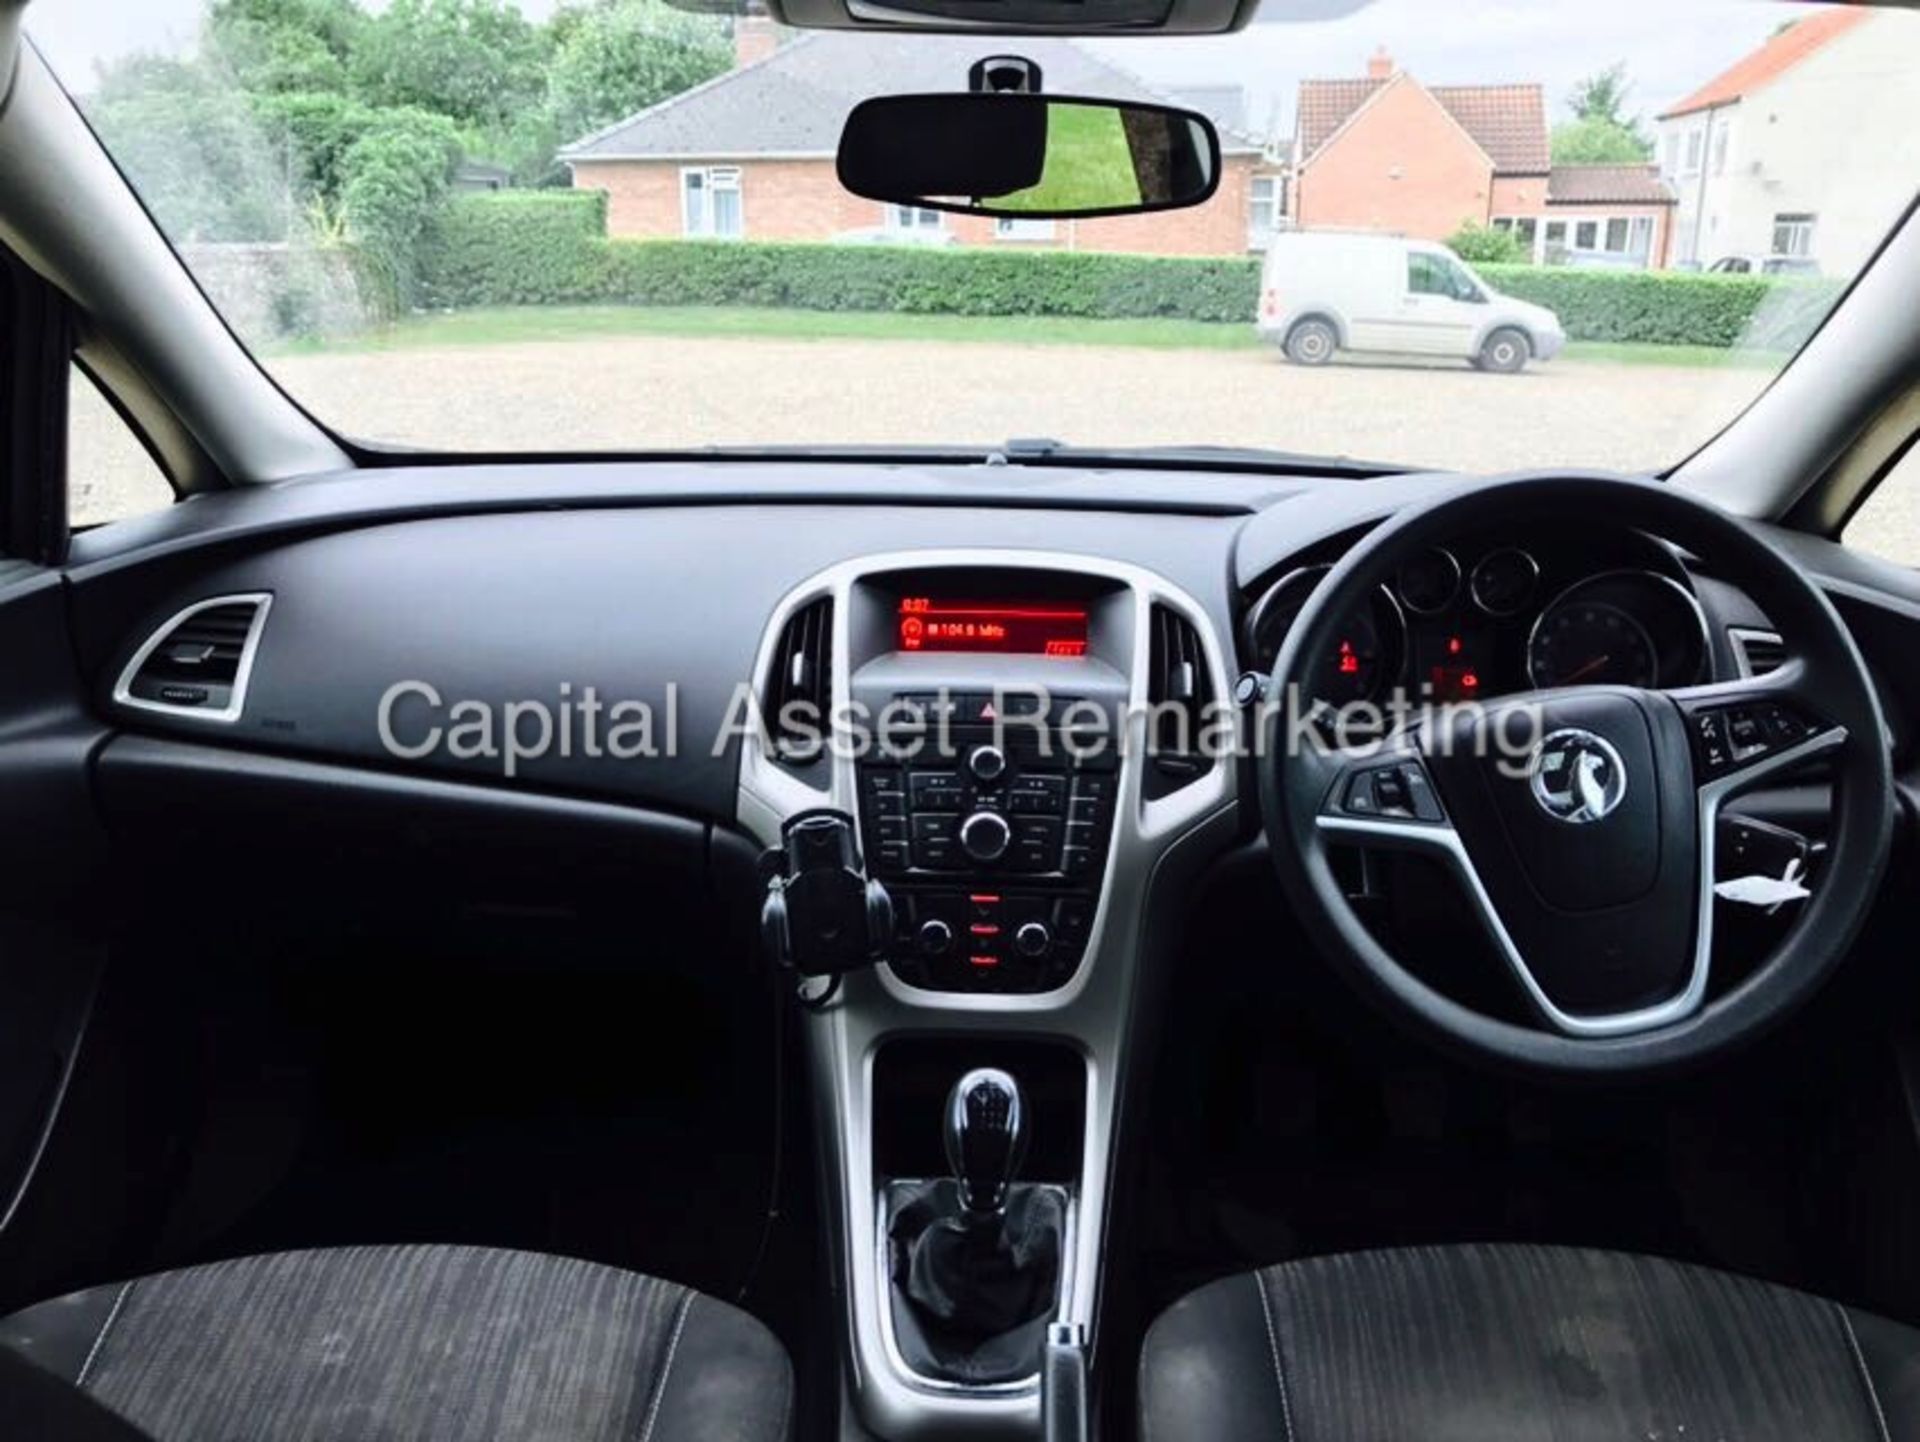 (ON SALE) VAUXHALL ASTRA 'EXCLUSIVE' (2012 MODEL) '1.7 CDTI - ECOFLEX - 6 SPEED' *AIR CON* (1 OWNER) - Image 11 of 19